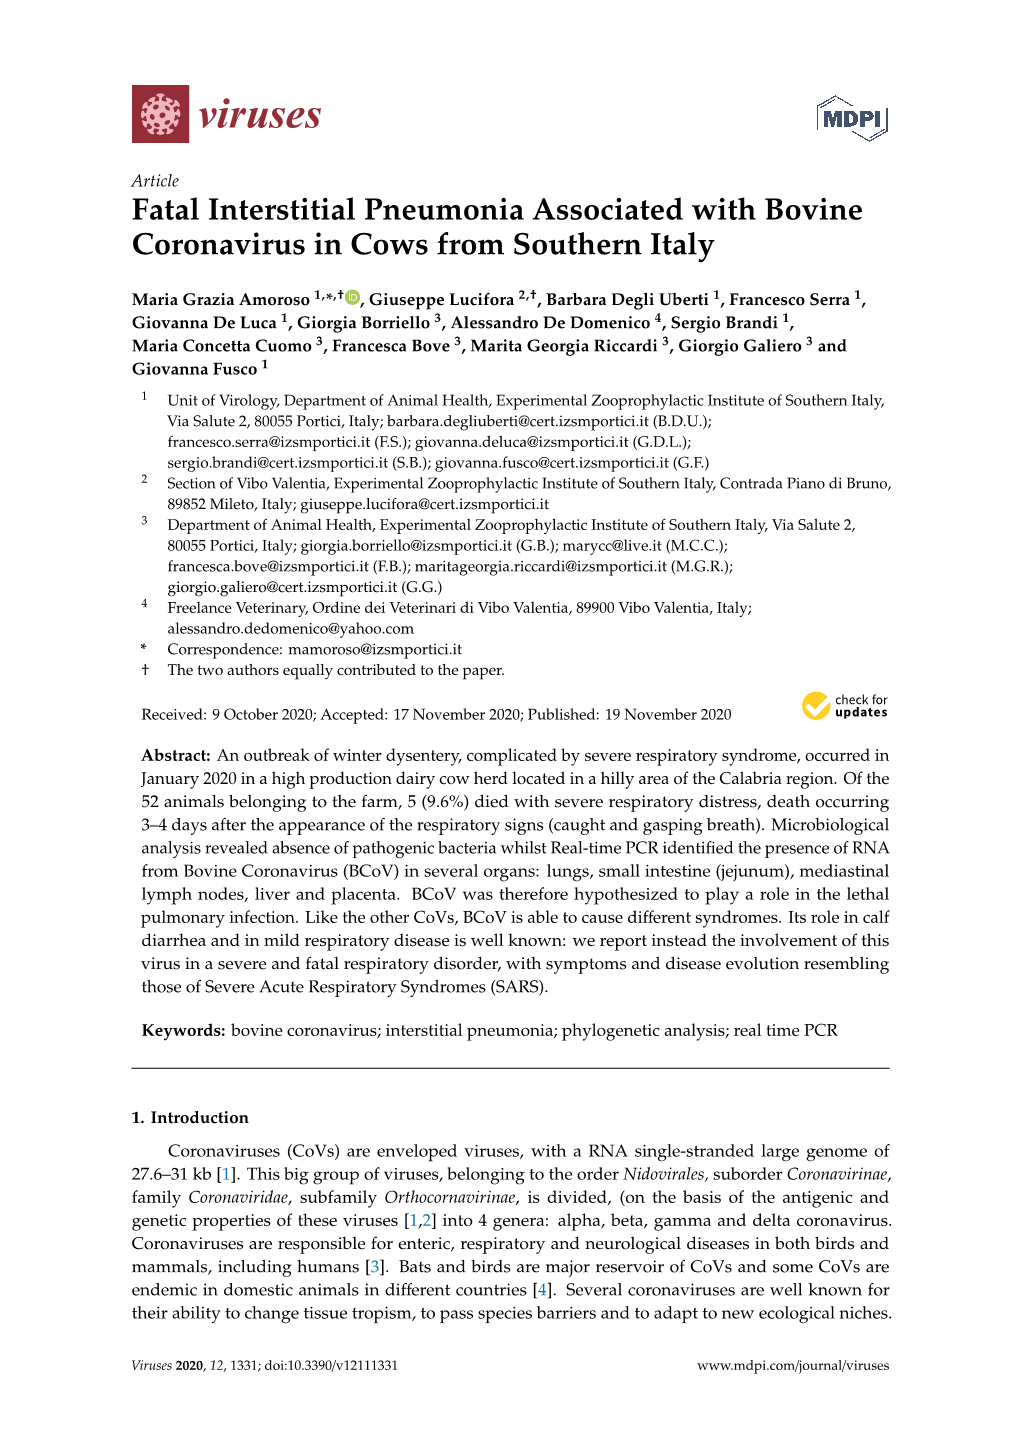 Fatal Interstitial Pneumonia Associated with Bovine Coronavirus in Cows from Southern Italy